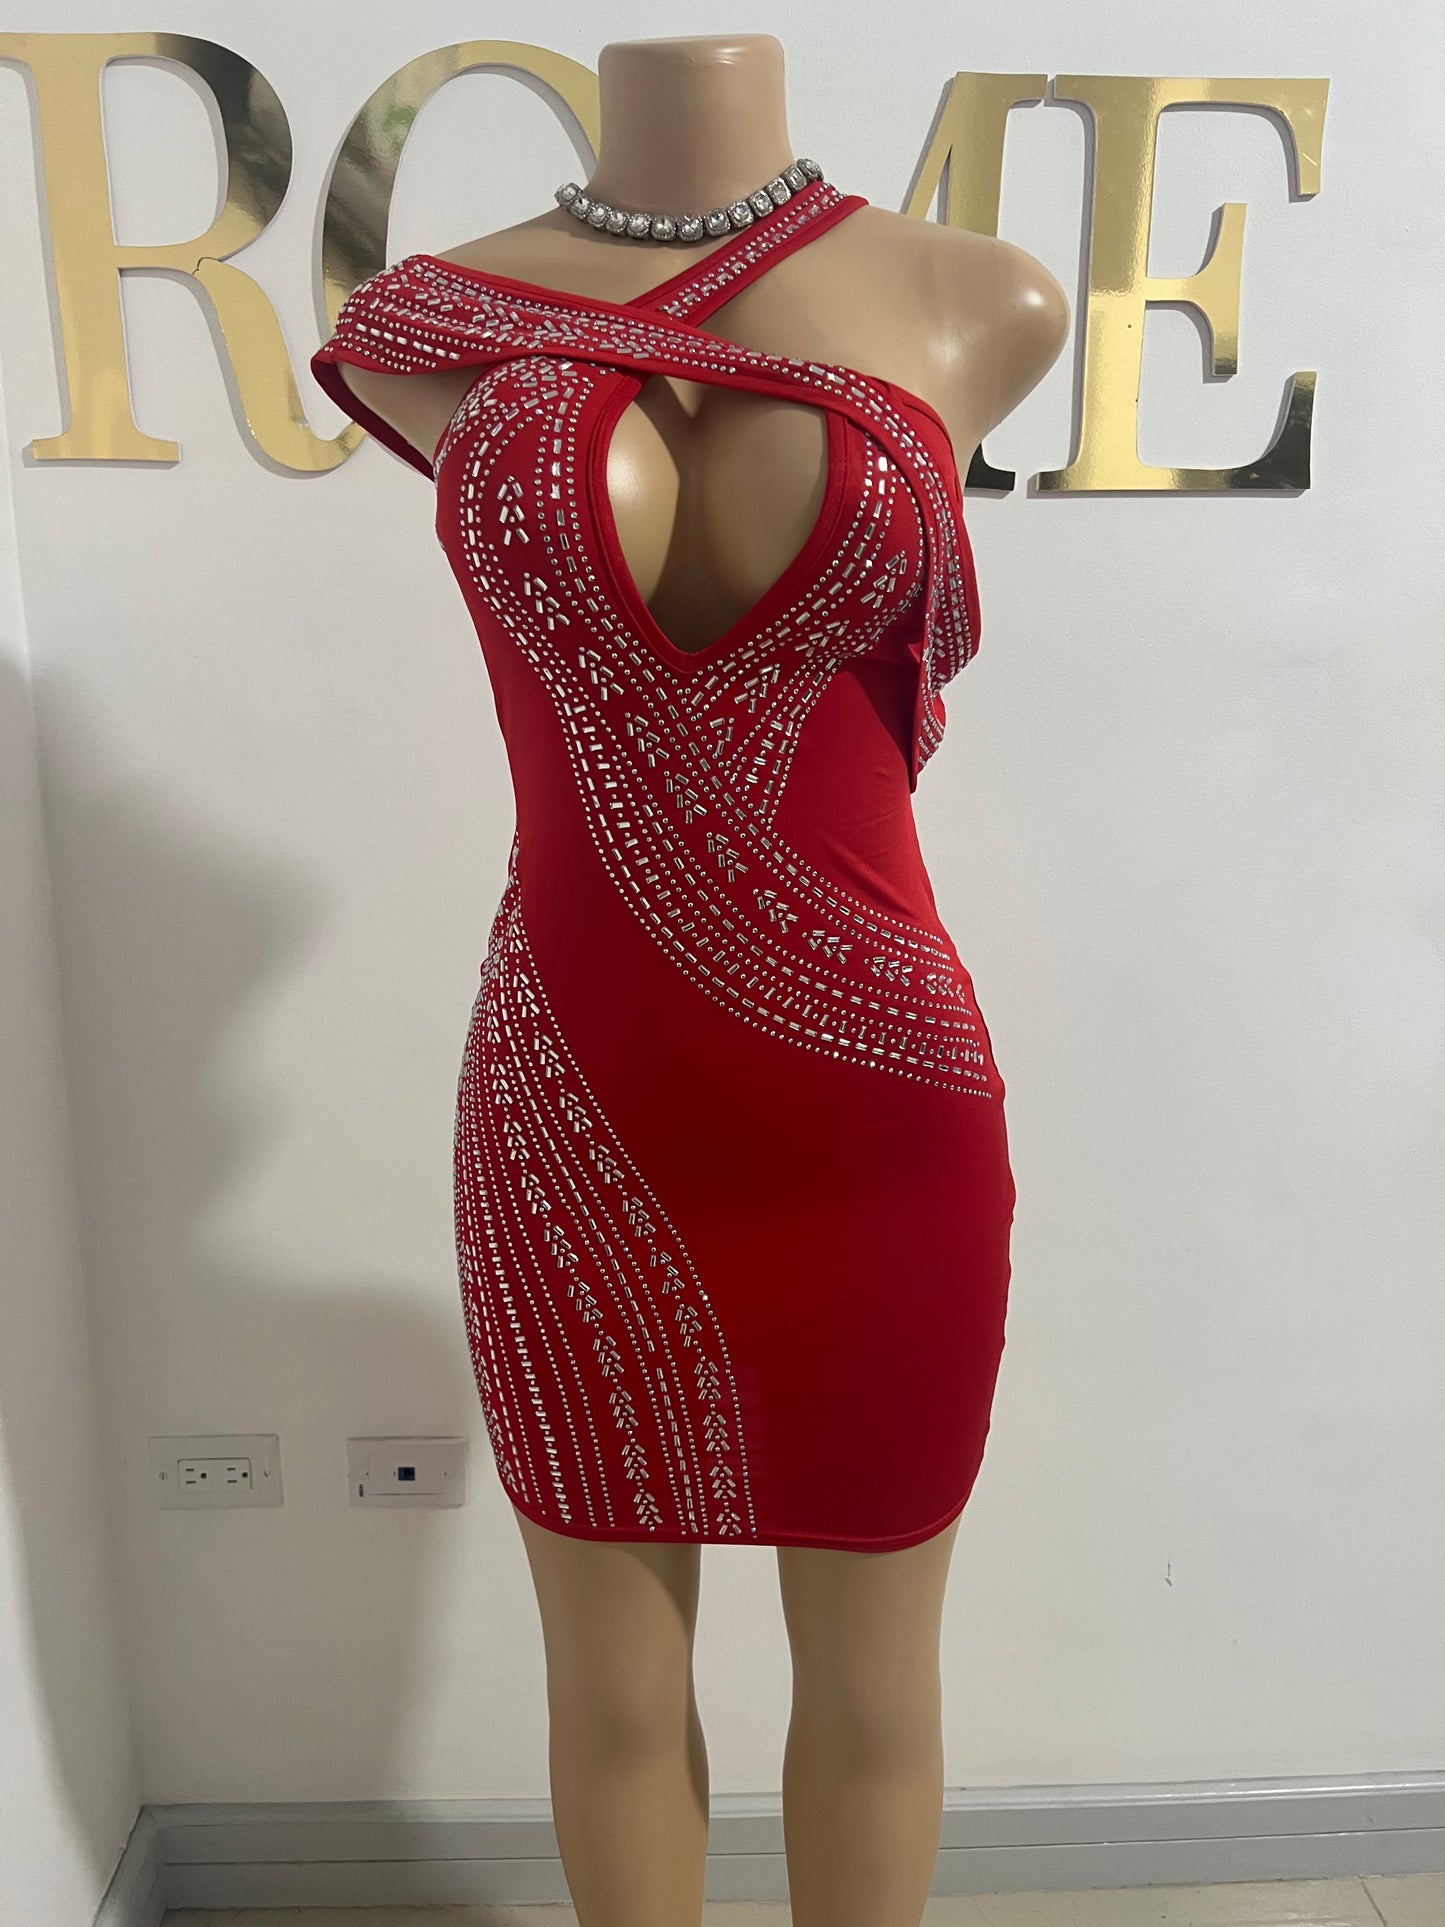 Ariel Colorful Crystal Dress (Red)